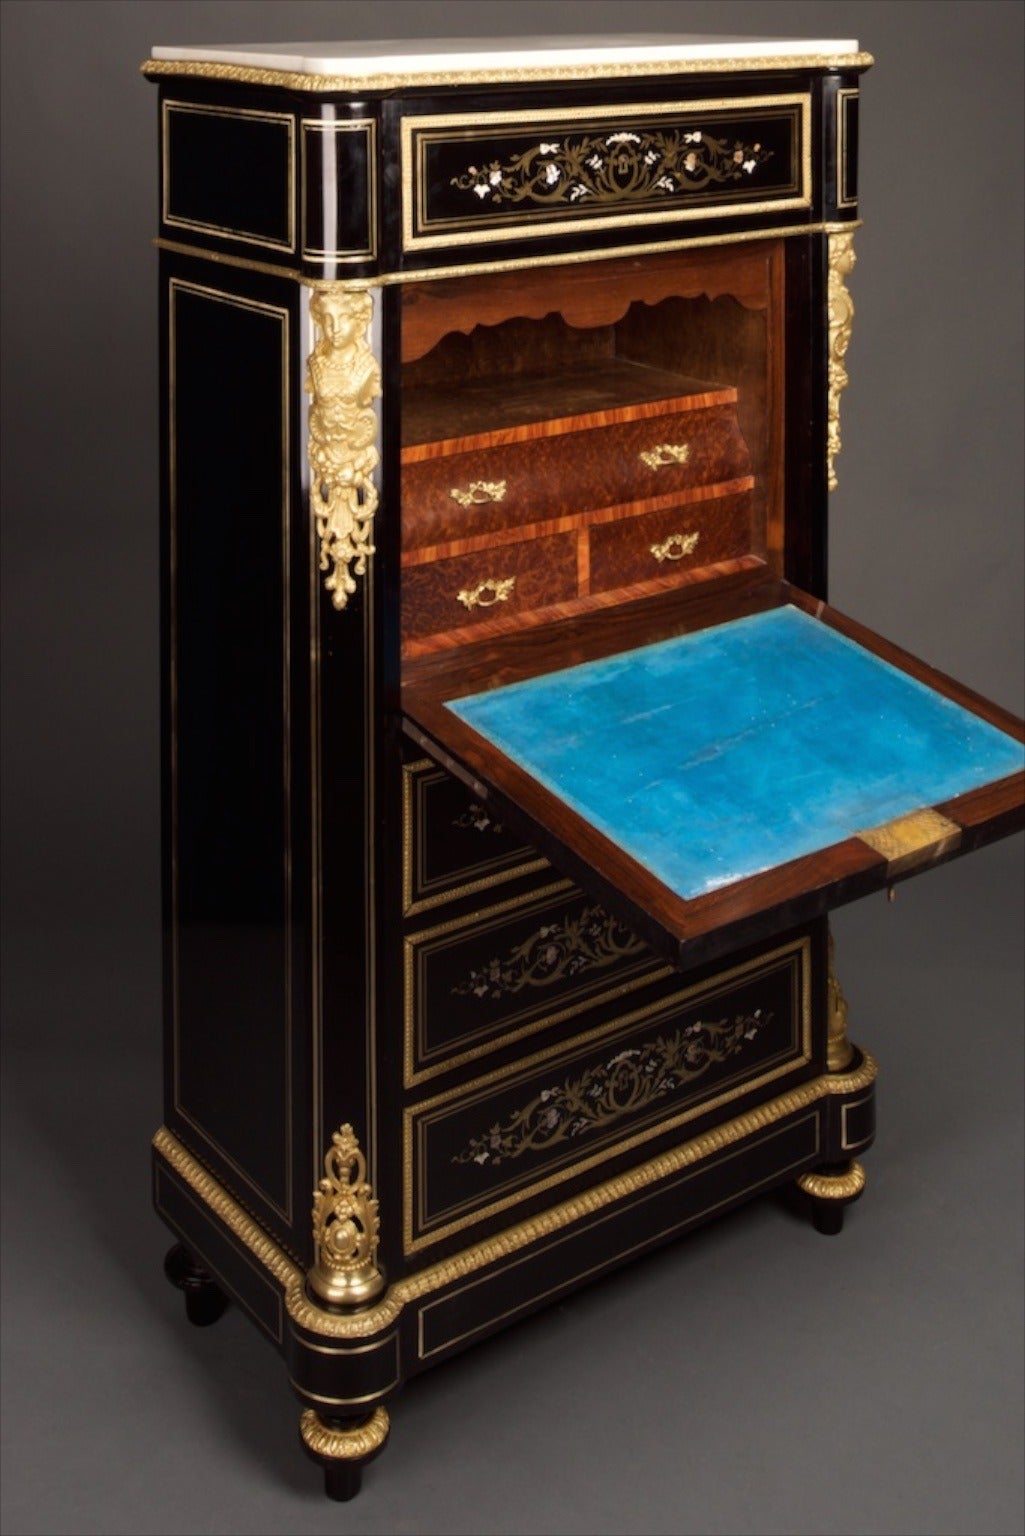 This secretaire is of desirable compact size and has recently undergone museum quality refurbishment. The unit comprises of four full width vertically stacked drawers all with raised gilt perimeter mouldings and with intricate inlays of brass